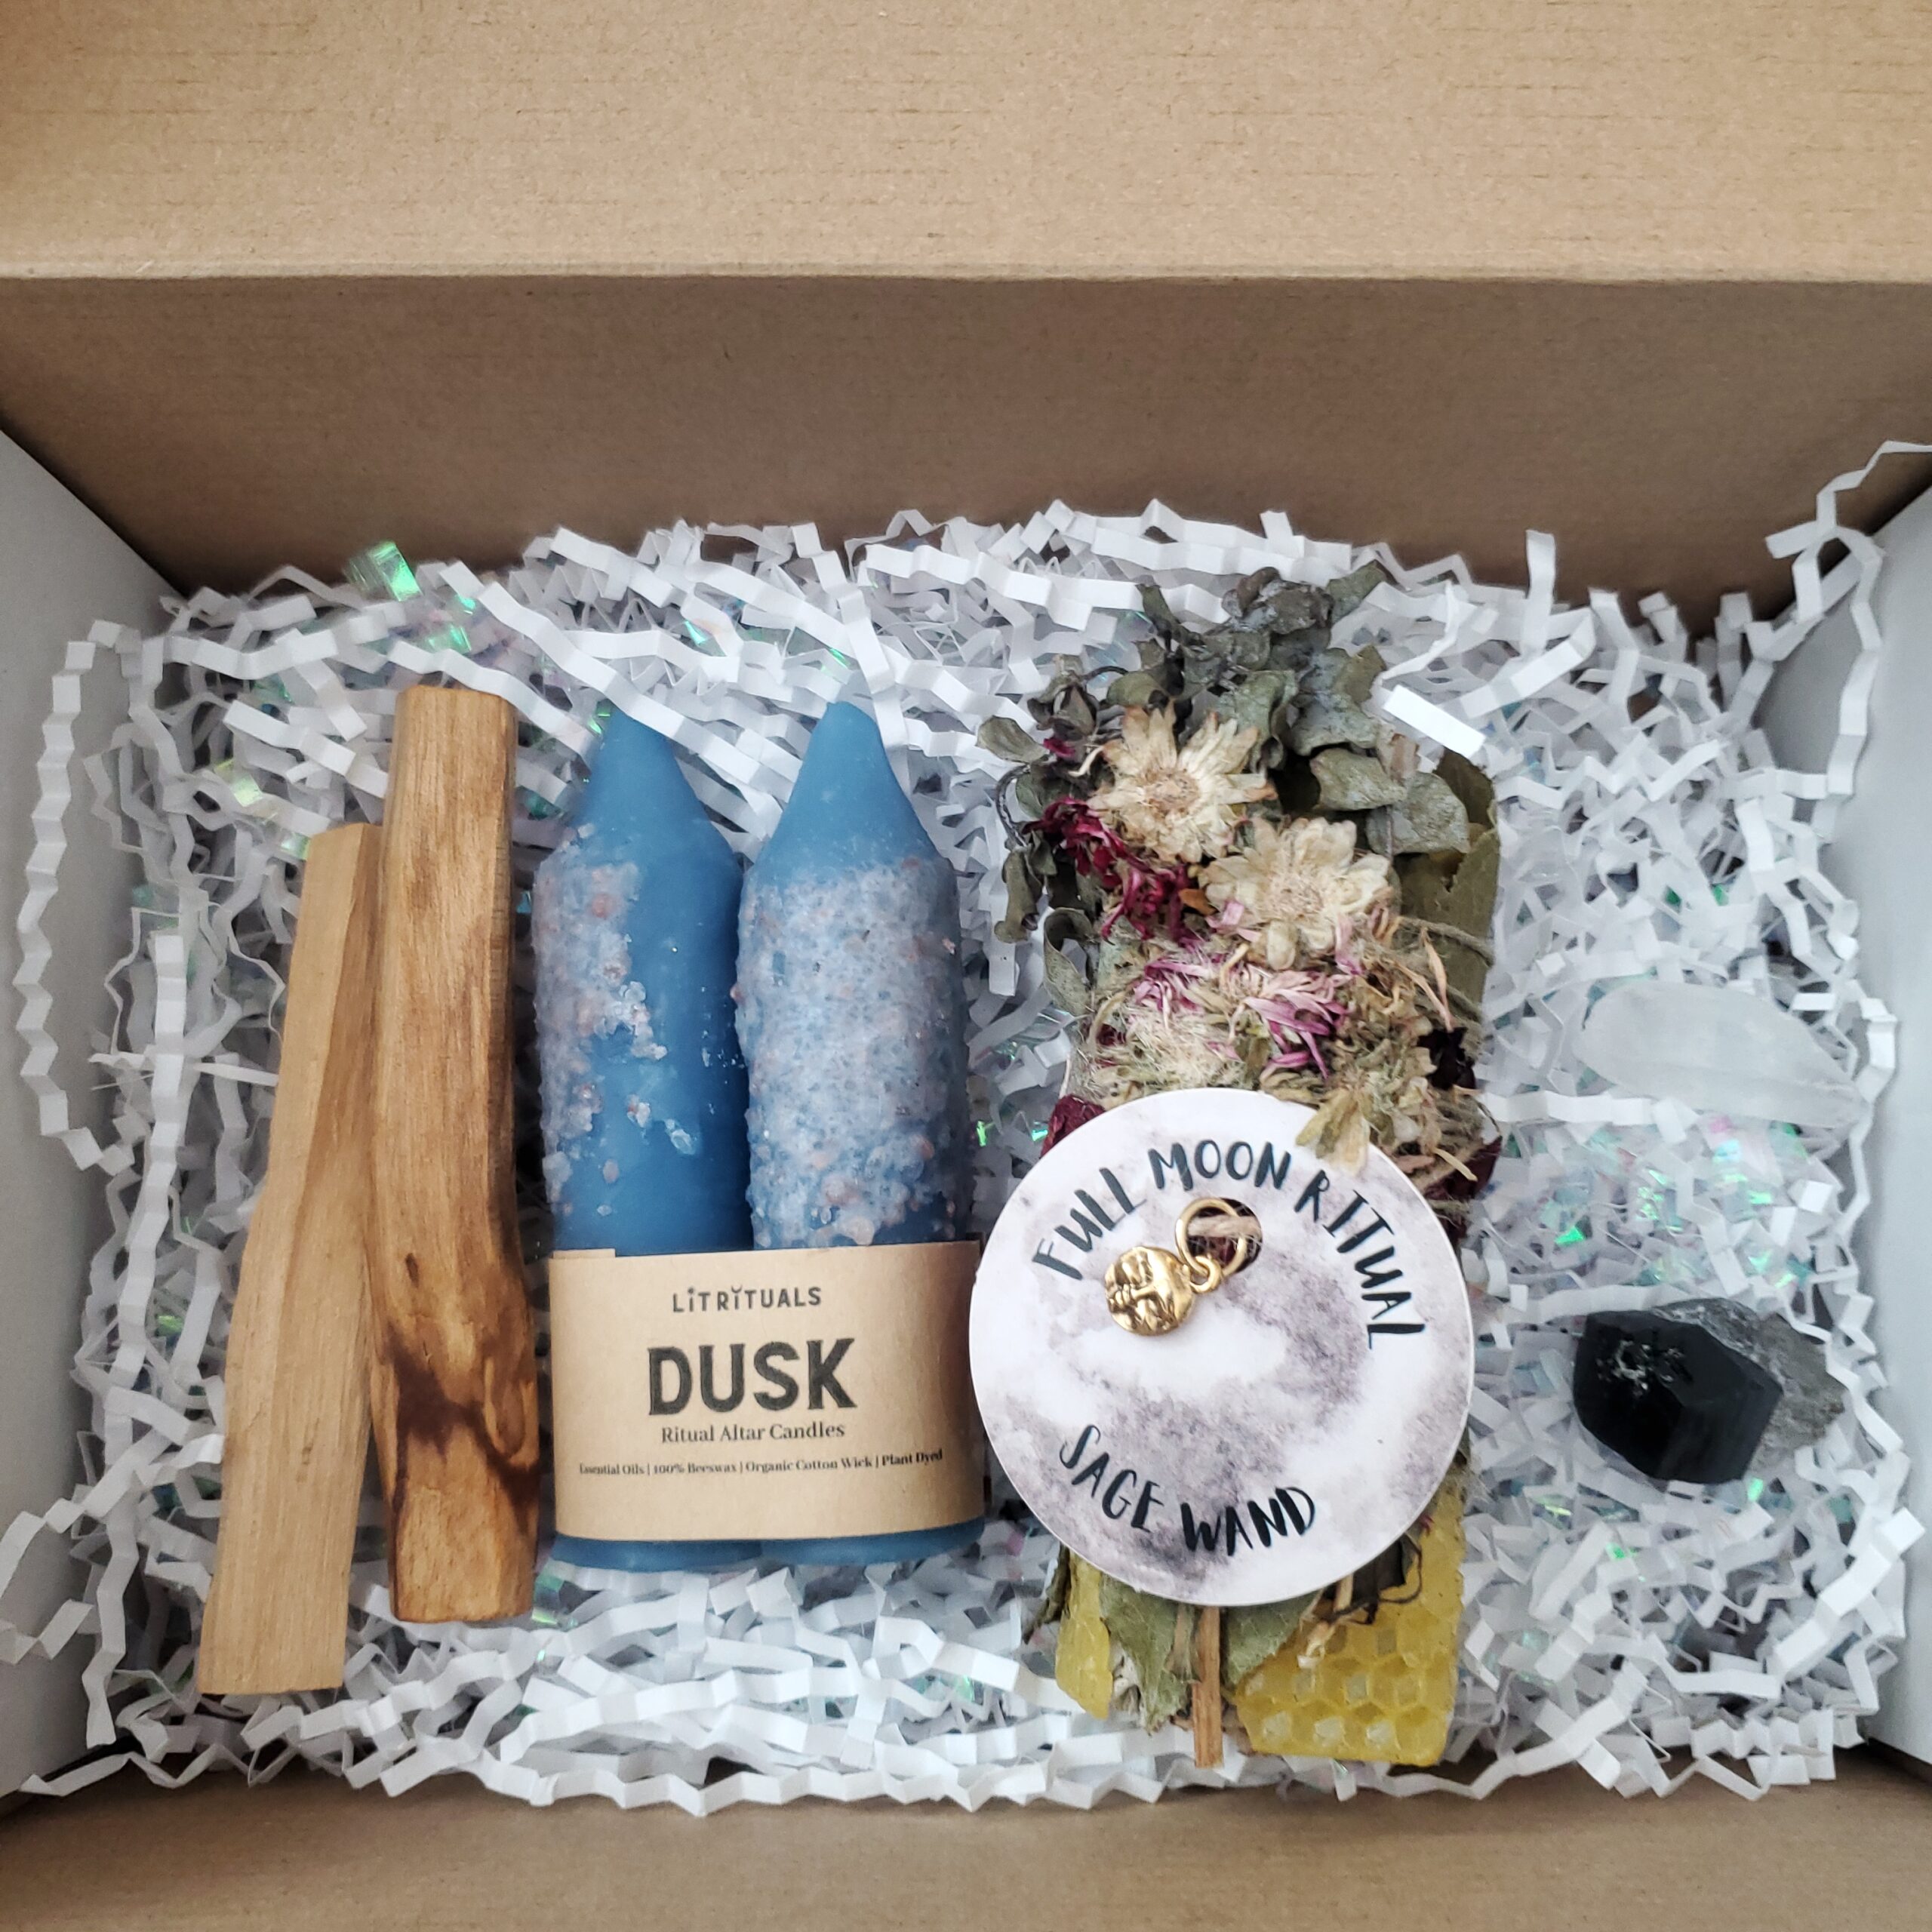 Full Moon Offering Smudge gift set